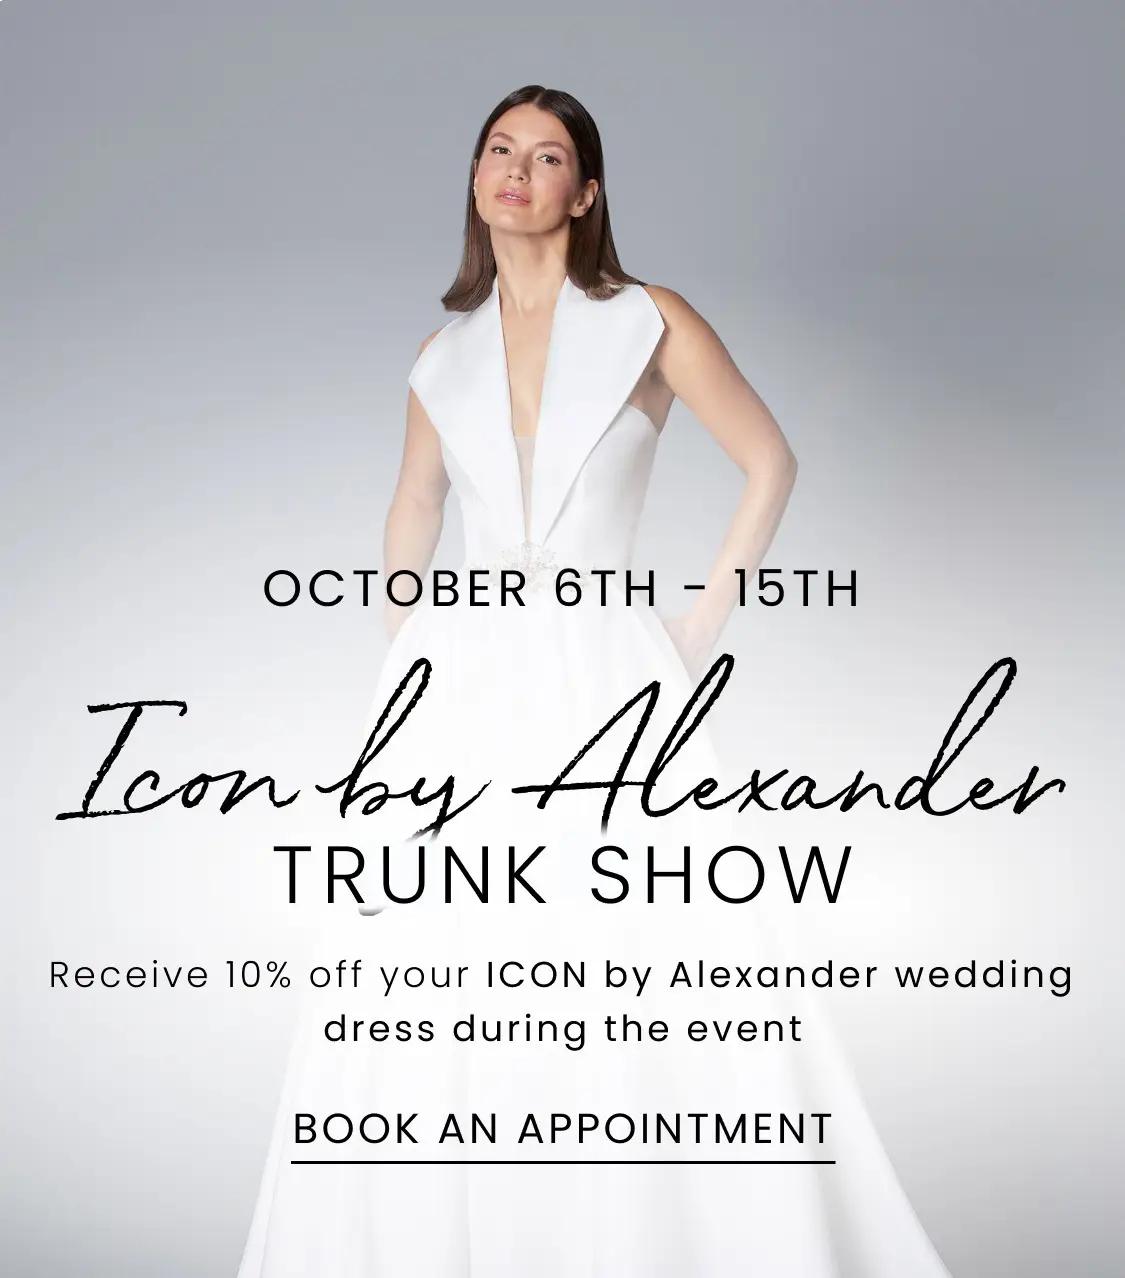 ICON by Alexander Trunk Show at Dublin Bridal. Models wearing wedding gowns. Desktop image.